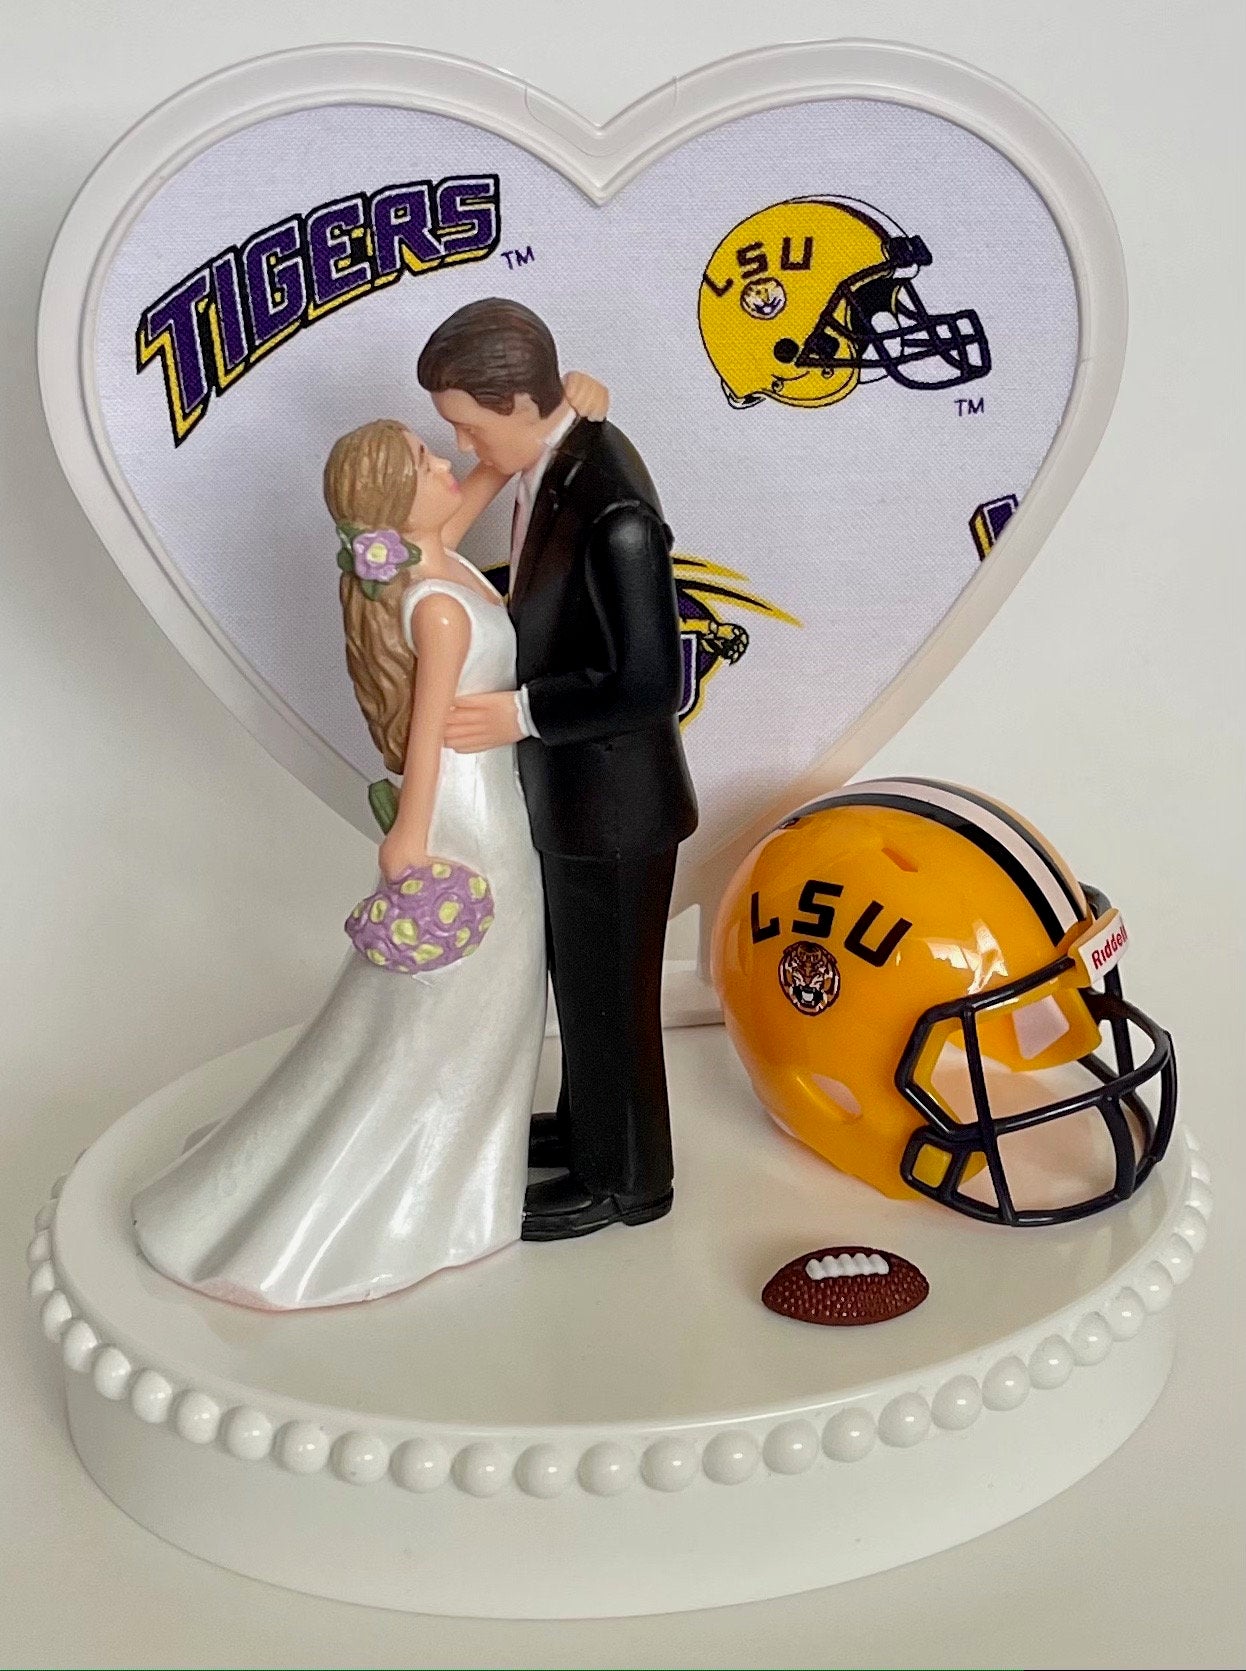 Wedding Cake Topper LSU Tigers Football Themed Louisiana St Gorgeous Long-Haired Bride Groom Unique Groom's Cake Top Reception Bridal Shower